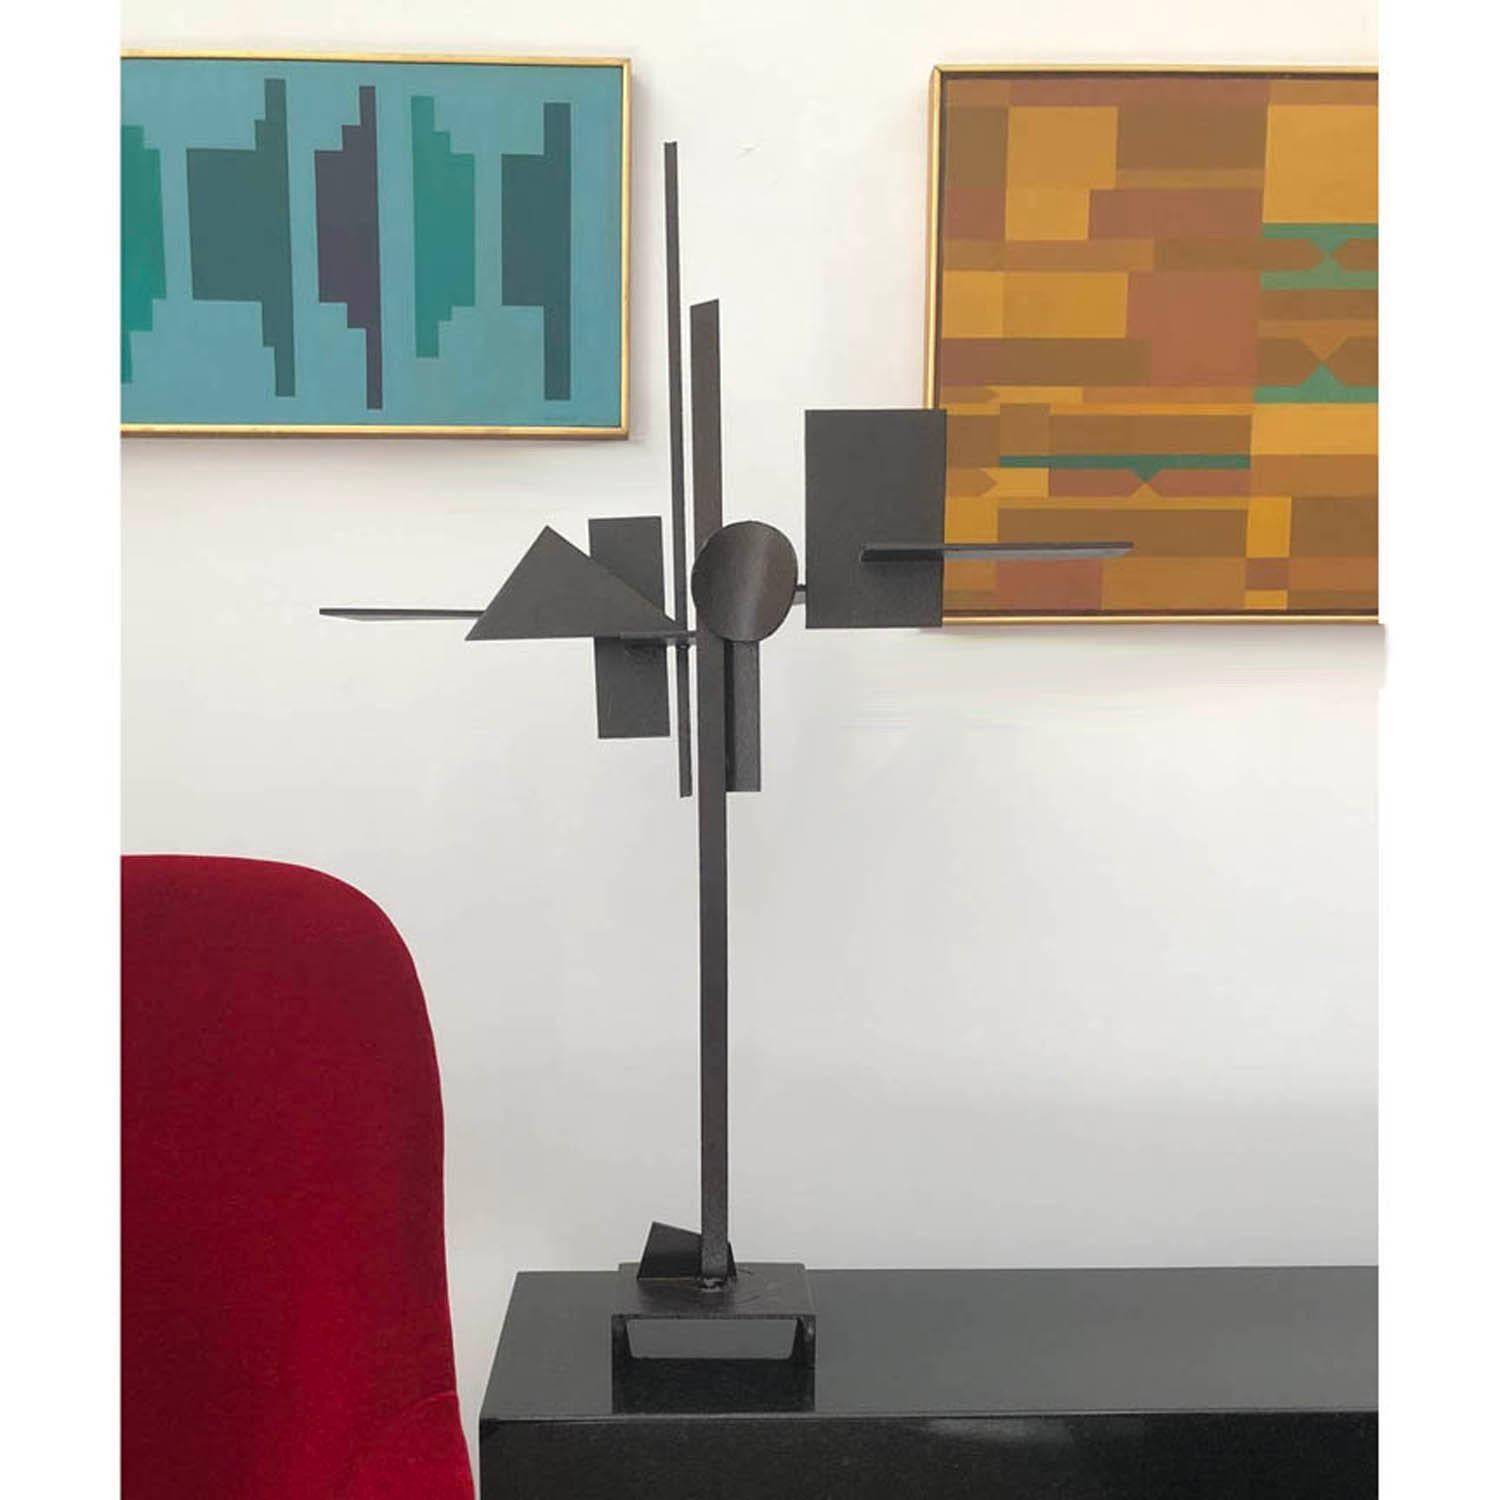 Welded steel sculpture by California artist Paul Kasper, American (1922- 9011)), circa 1970, this Fine Art sculpture makes a bold modern statement. Acquired directly from the artist's estate.

Complementary delivery in the Los Angeles / Beverly